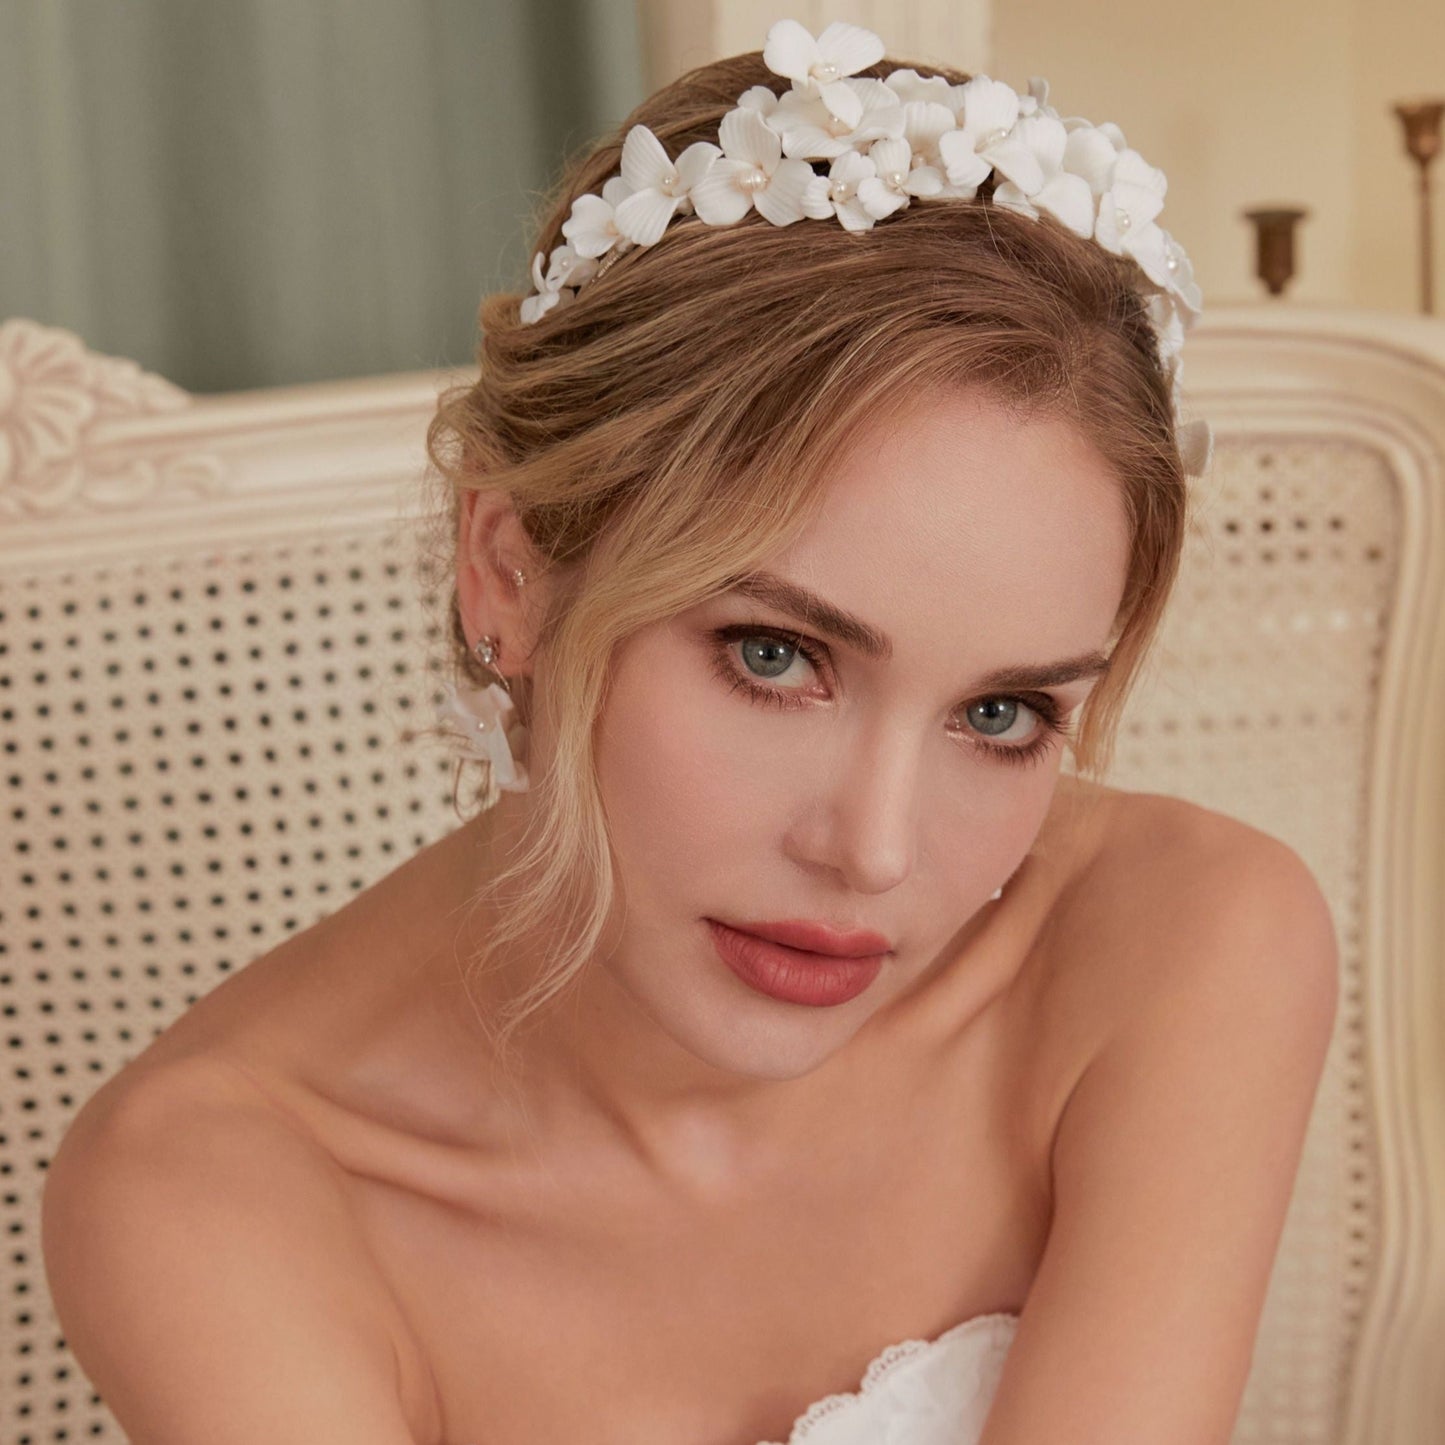 A gloriously romantic hand-sculpted porcelain bridal crown. Made with an arrangement of individually crafted flowers and dainty pearls. This full and textured headband makes a statement but yet still feels incredibly feminine.